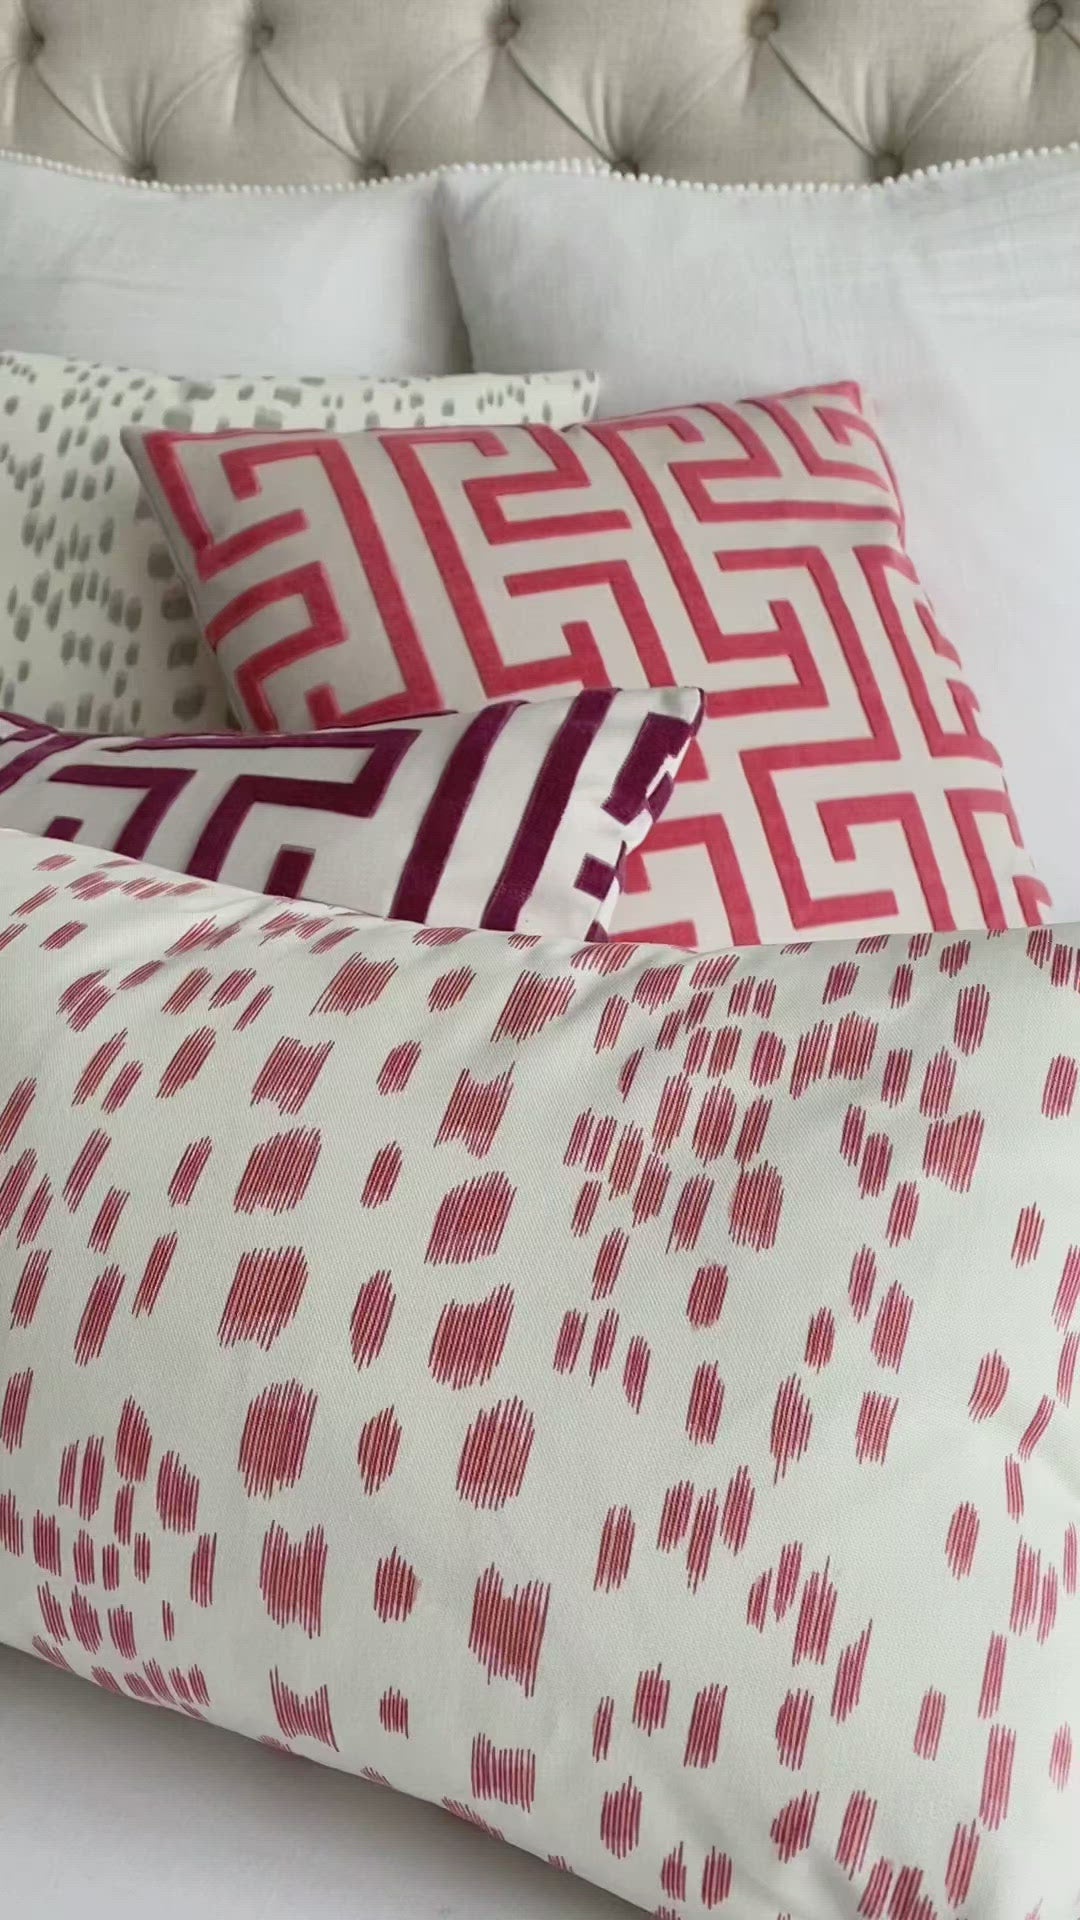 Les Touches Berry Pink Designer Luxury Throw Pillow Cover Product Video